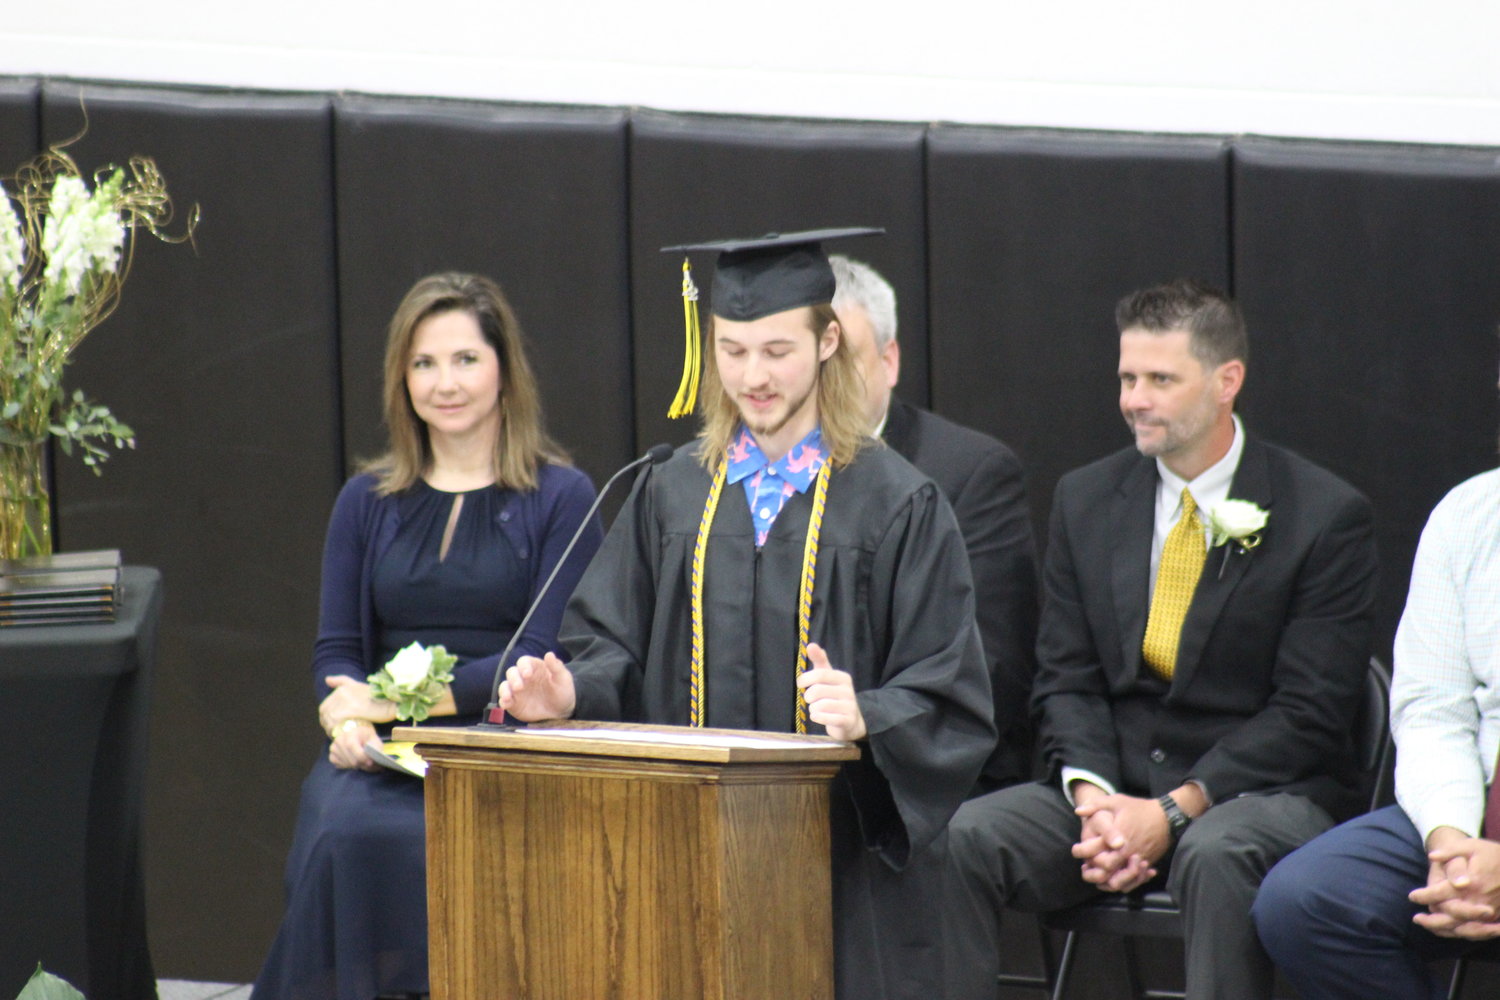 Kyle Zaruba delivers a commencement speech to his graduating class on Sunday.